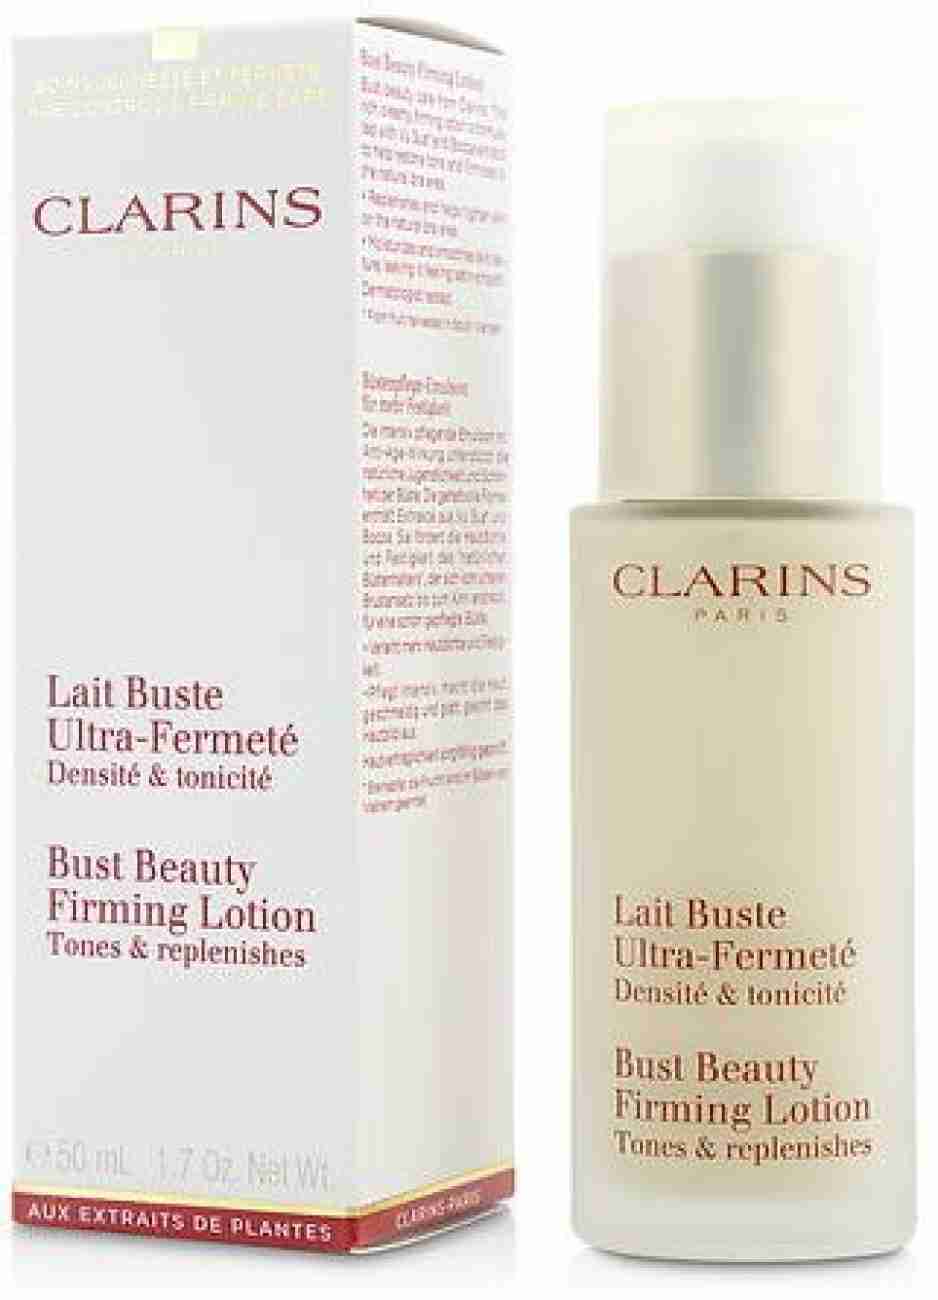 Clarins Paris By Bust Beauty Firming Lotion - Price in India, Buy Clarins Paris Bust Beauty Firming Lotion Online In India, Reviews, Ratings & Features | Flipkart.com